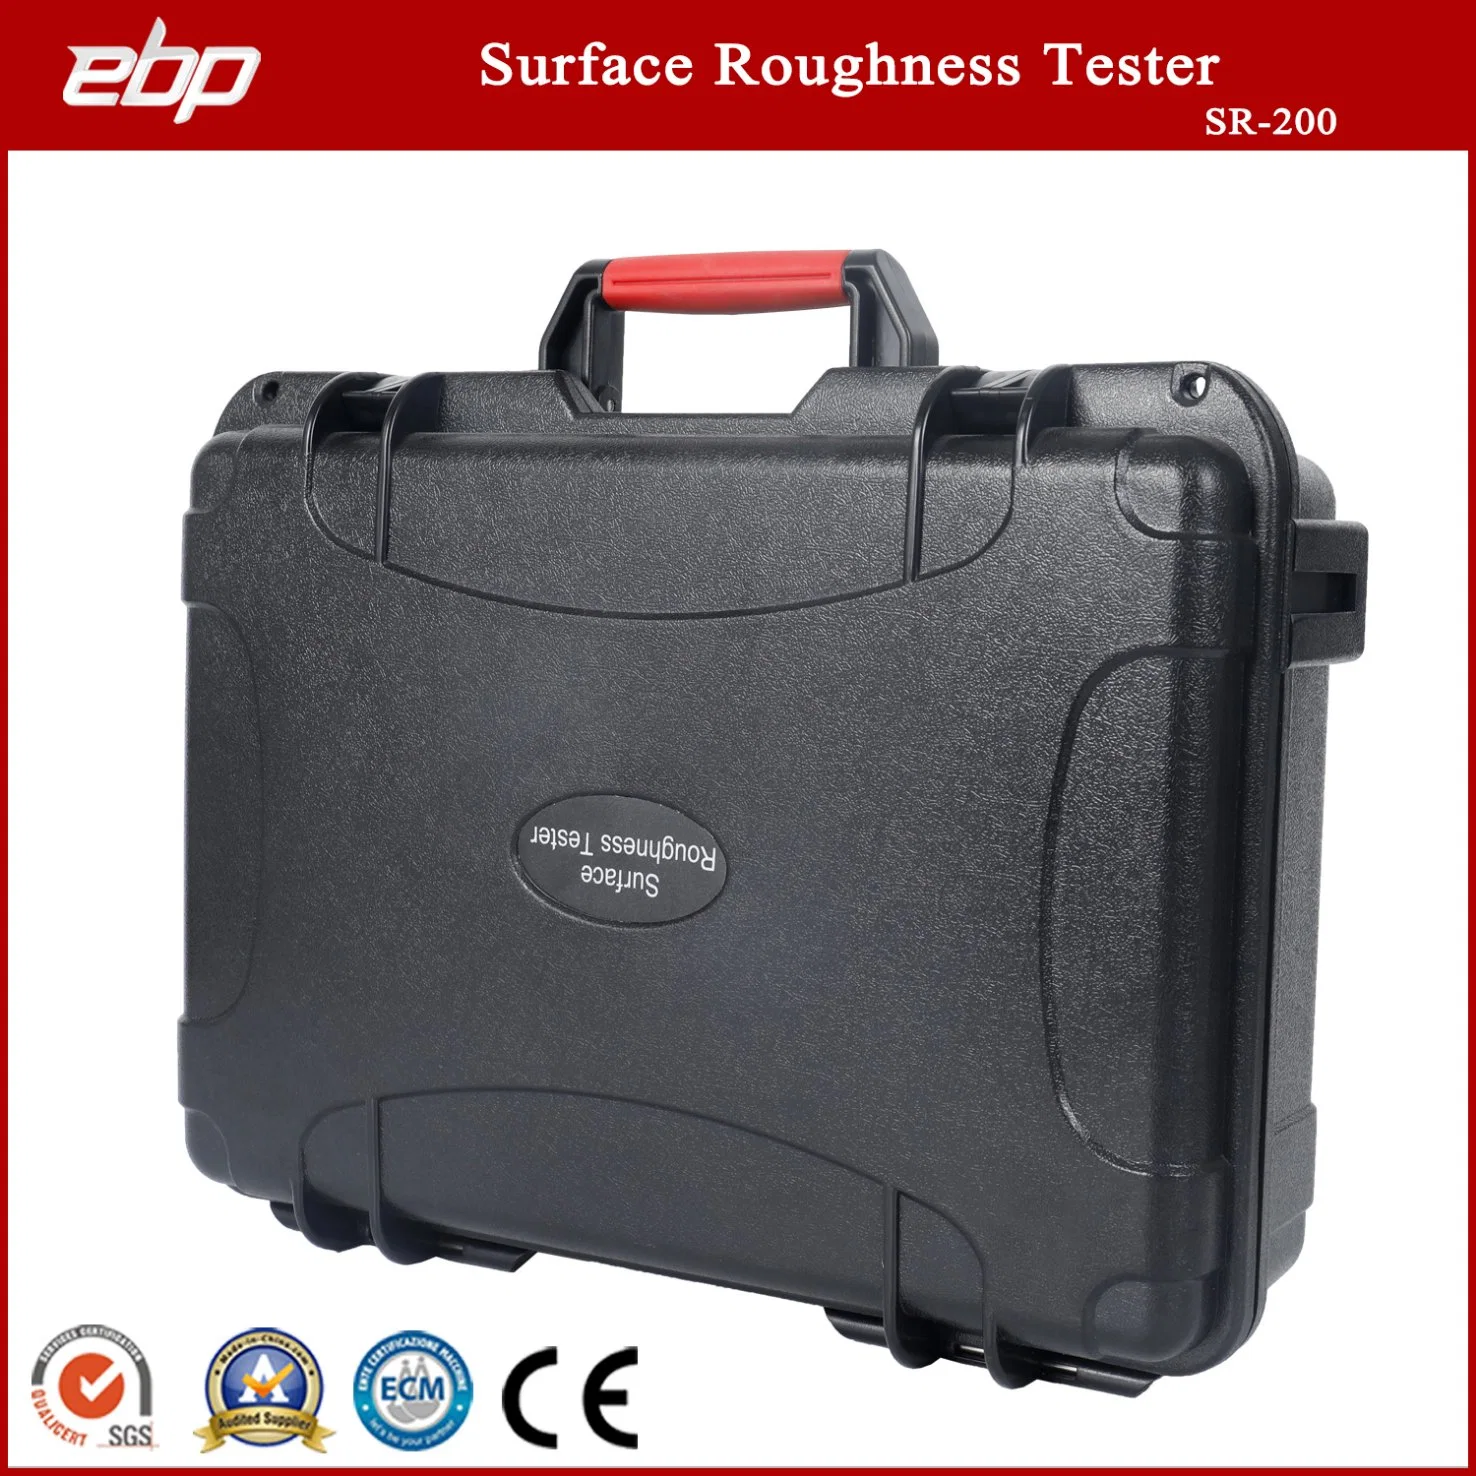 0.001 Accuracy Portable Digital Surface Roughness Tester with Different Units